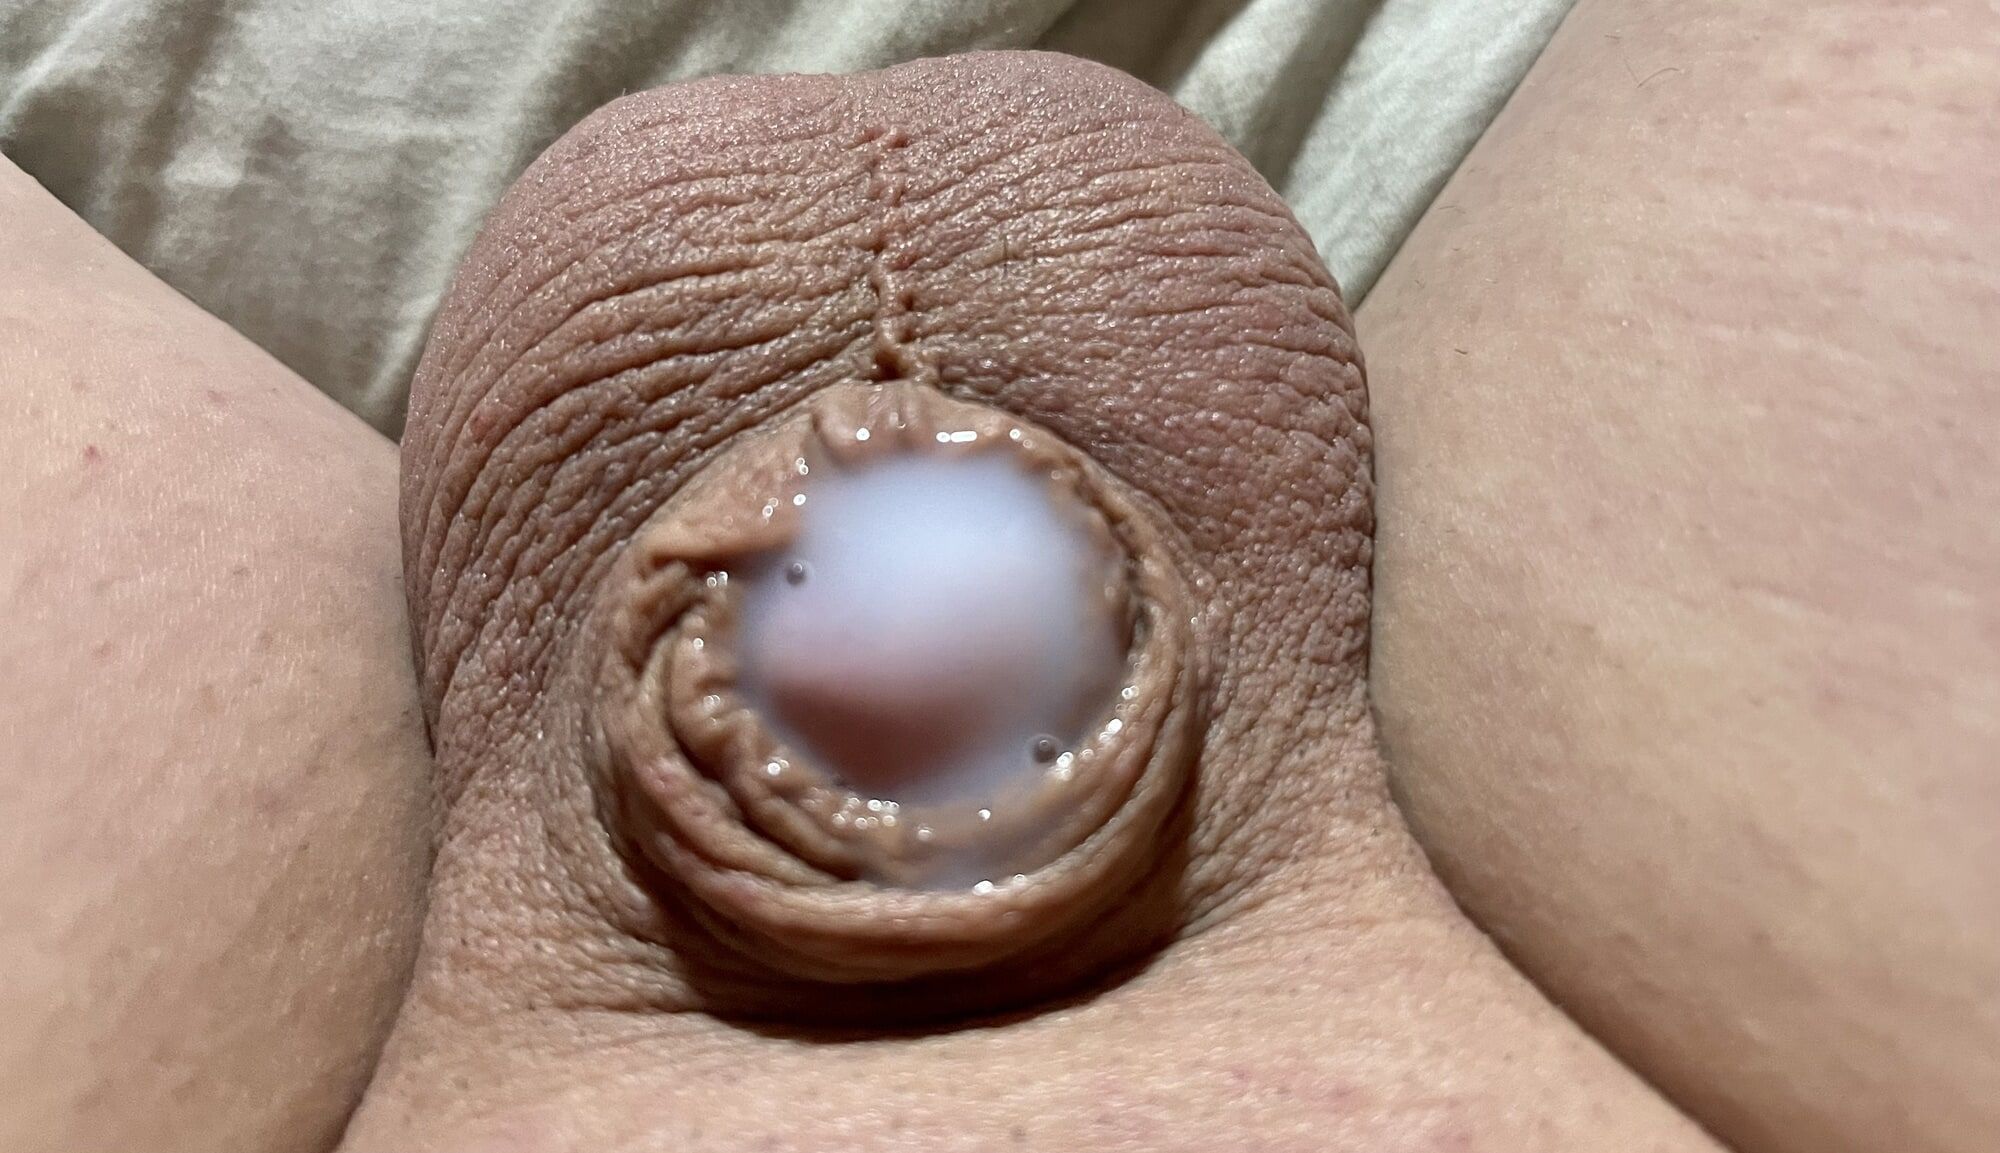 Inverted cock cum filled photos day #2